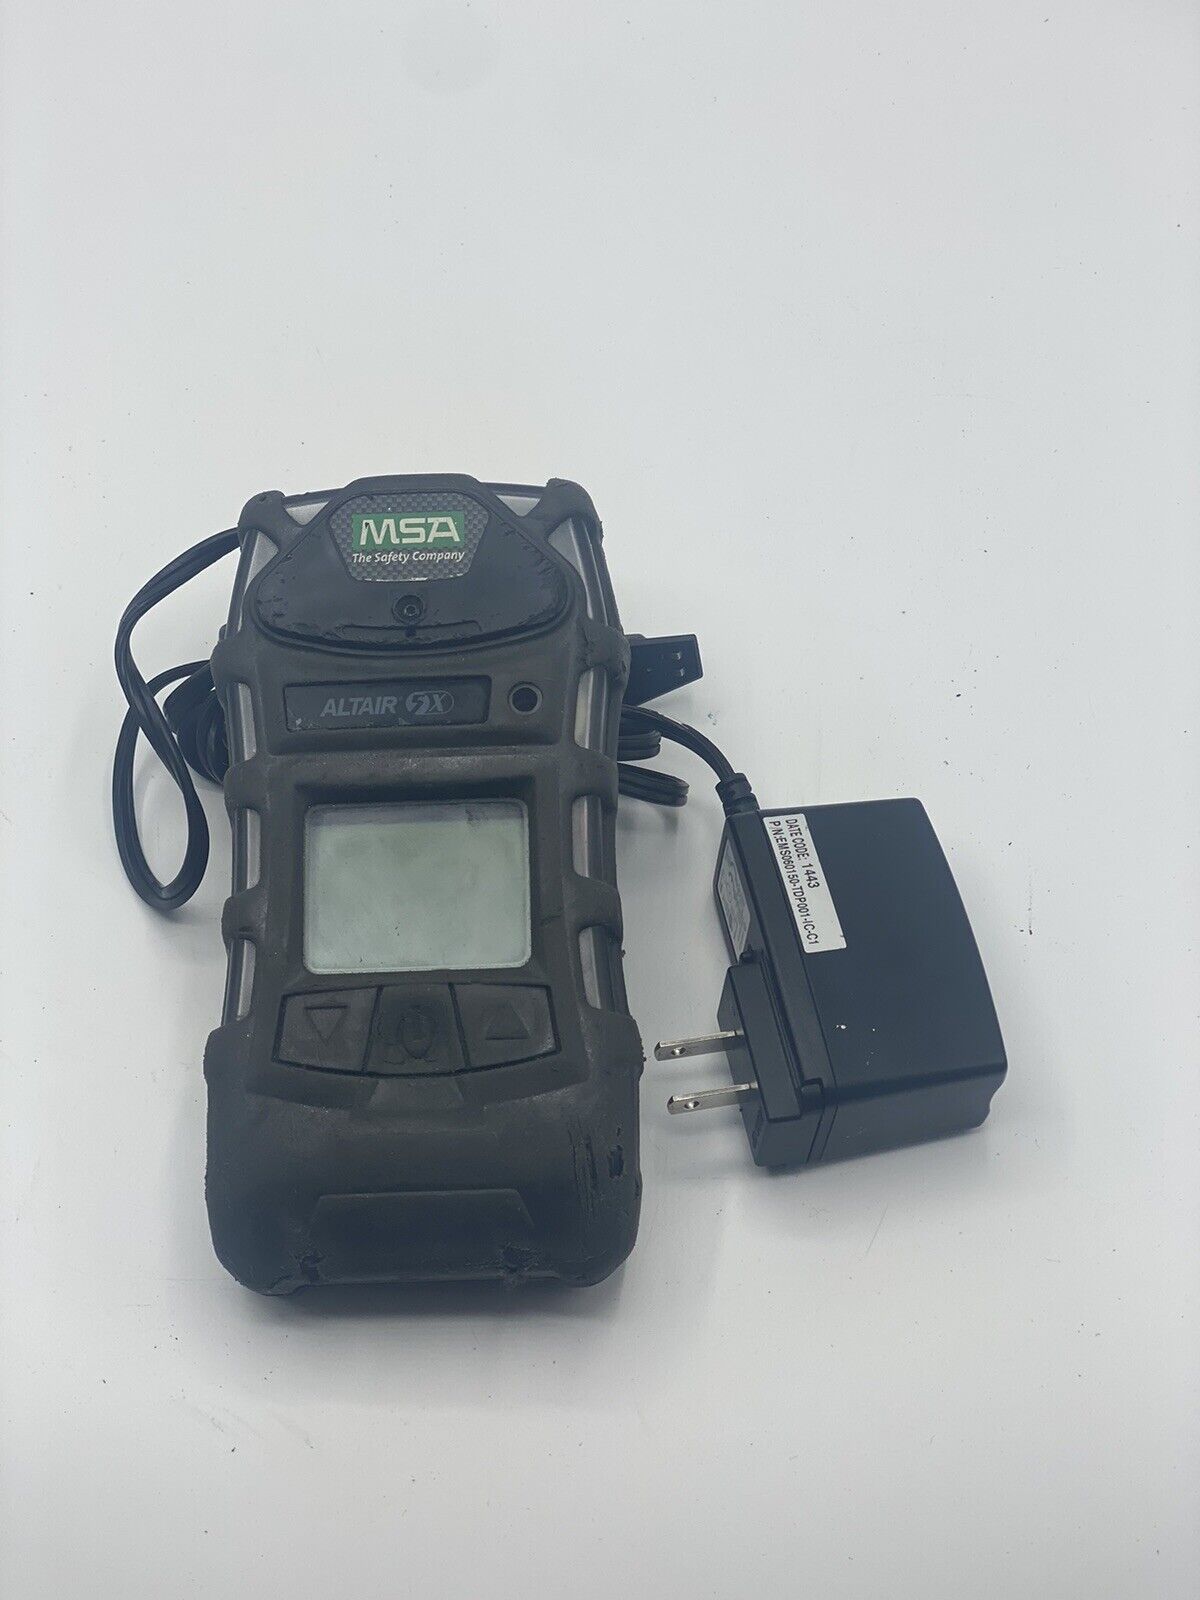 MSA Altair 5X Bluetooth Gas Detector Meter - Powers On With Charger. NOT WORKING